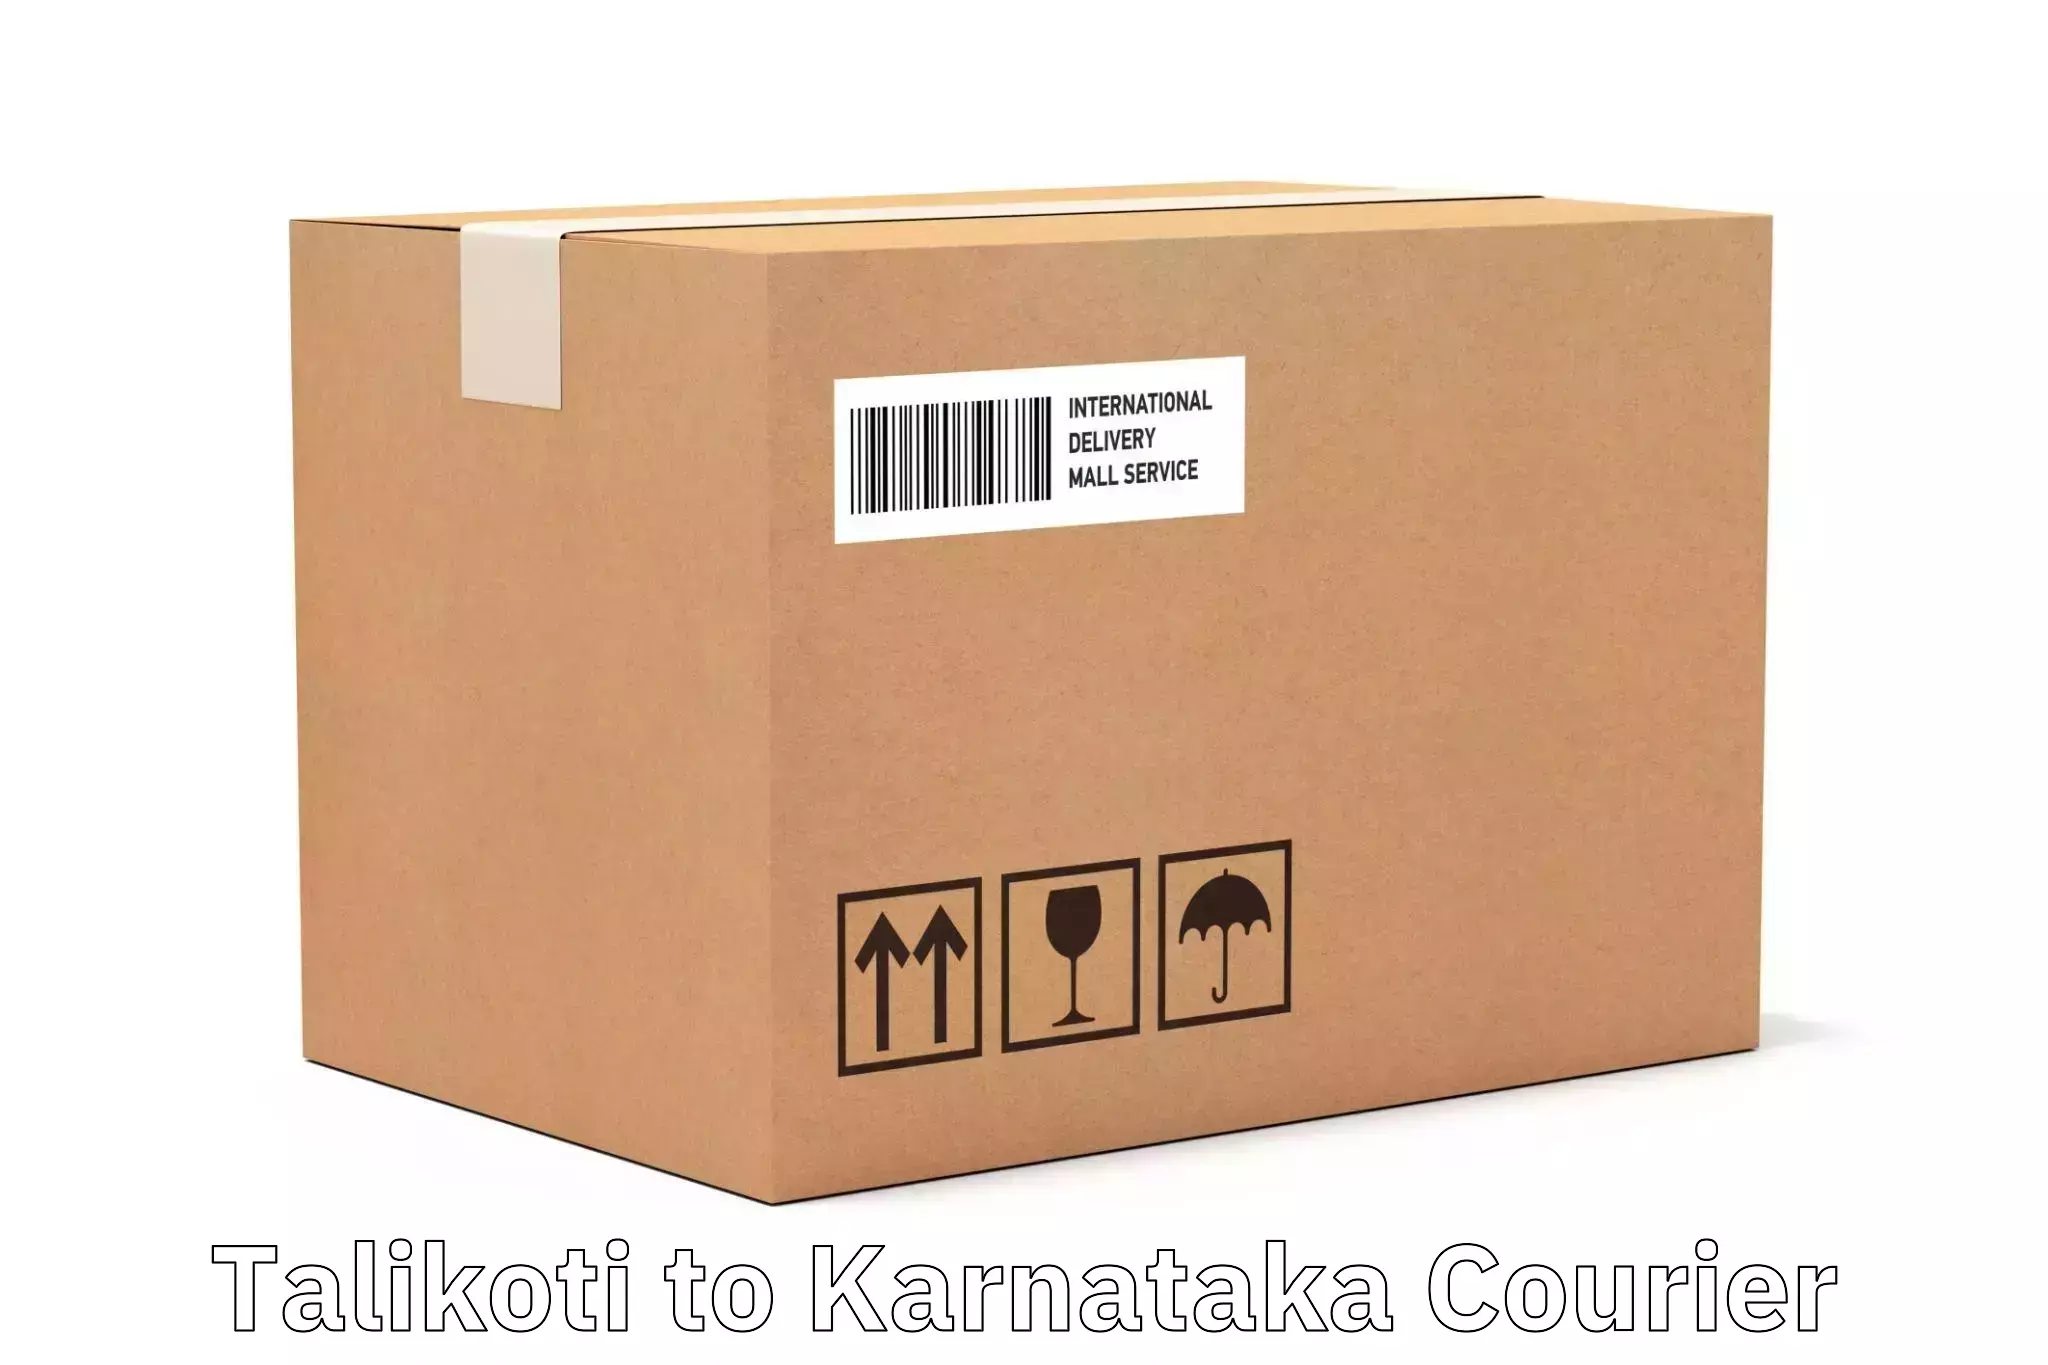 Next-generation courier services Talikoti to Mangalore Port